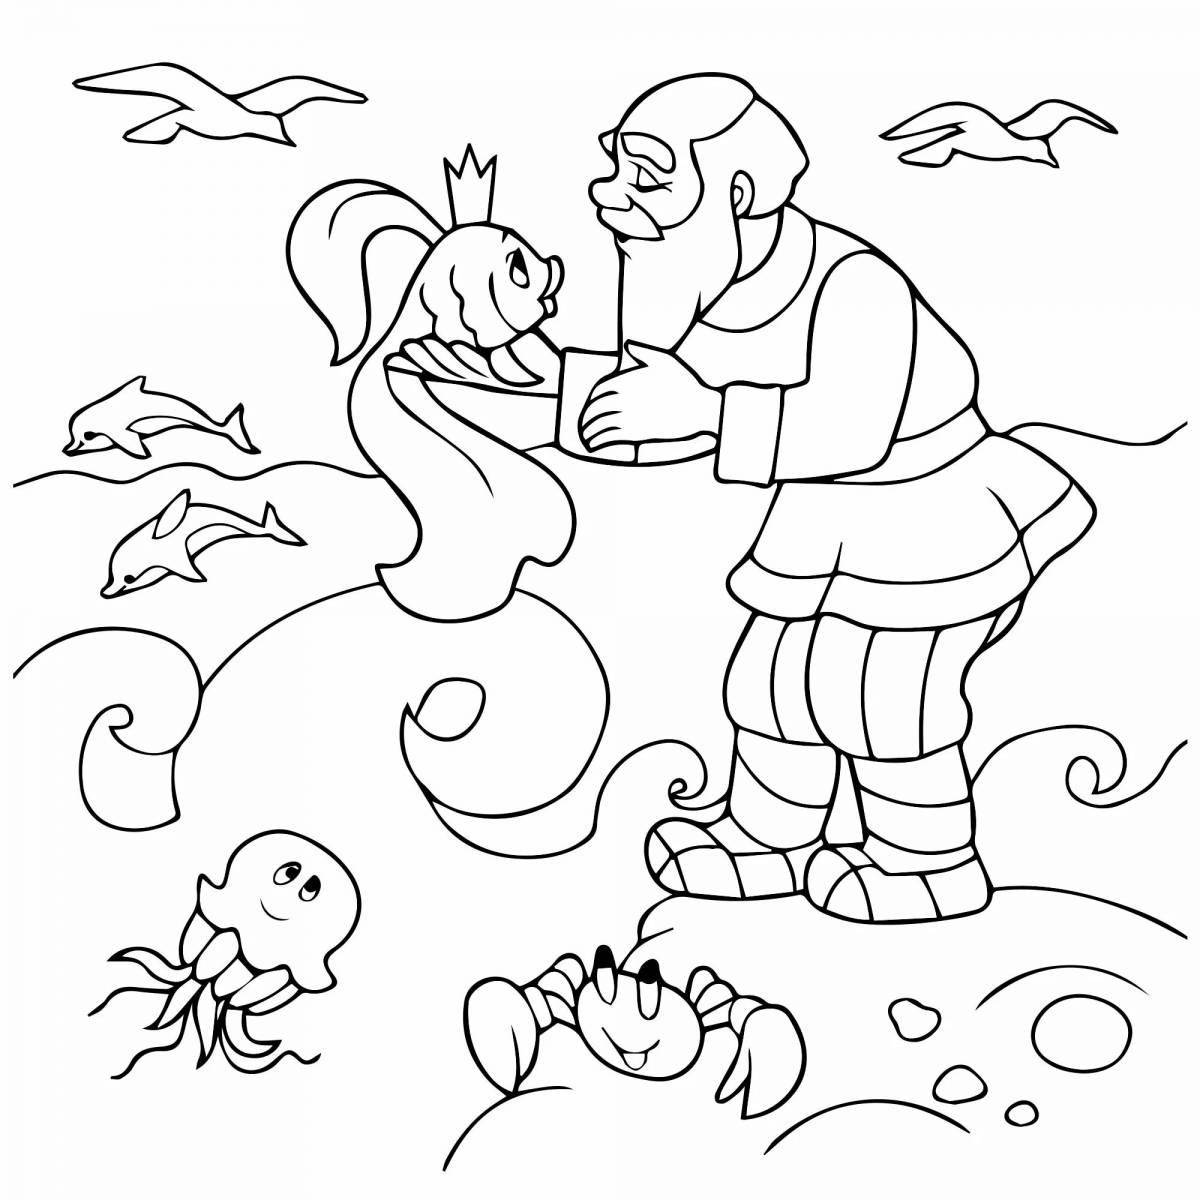 Live coloring based on Pushkin's fairy tales for children 5-6 years old